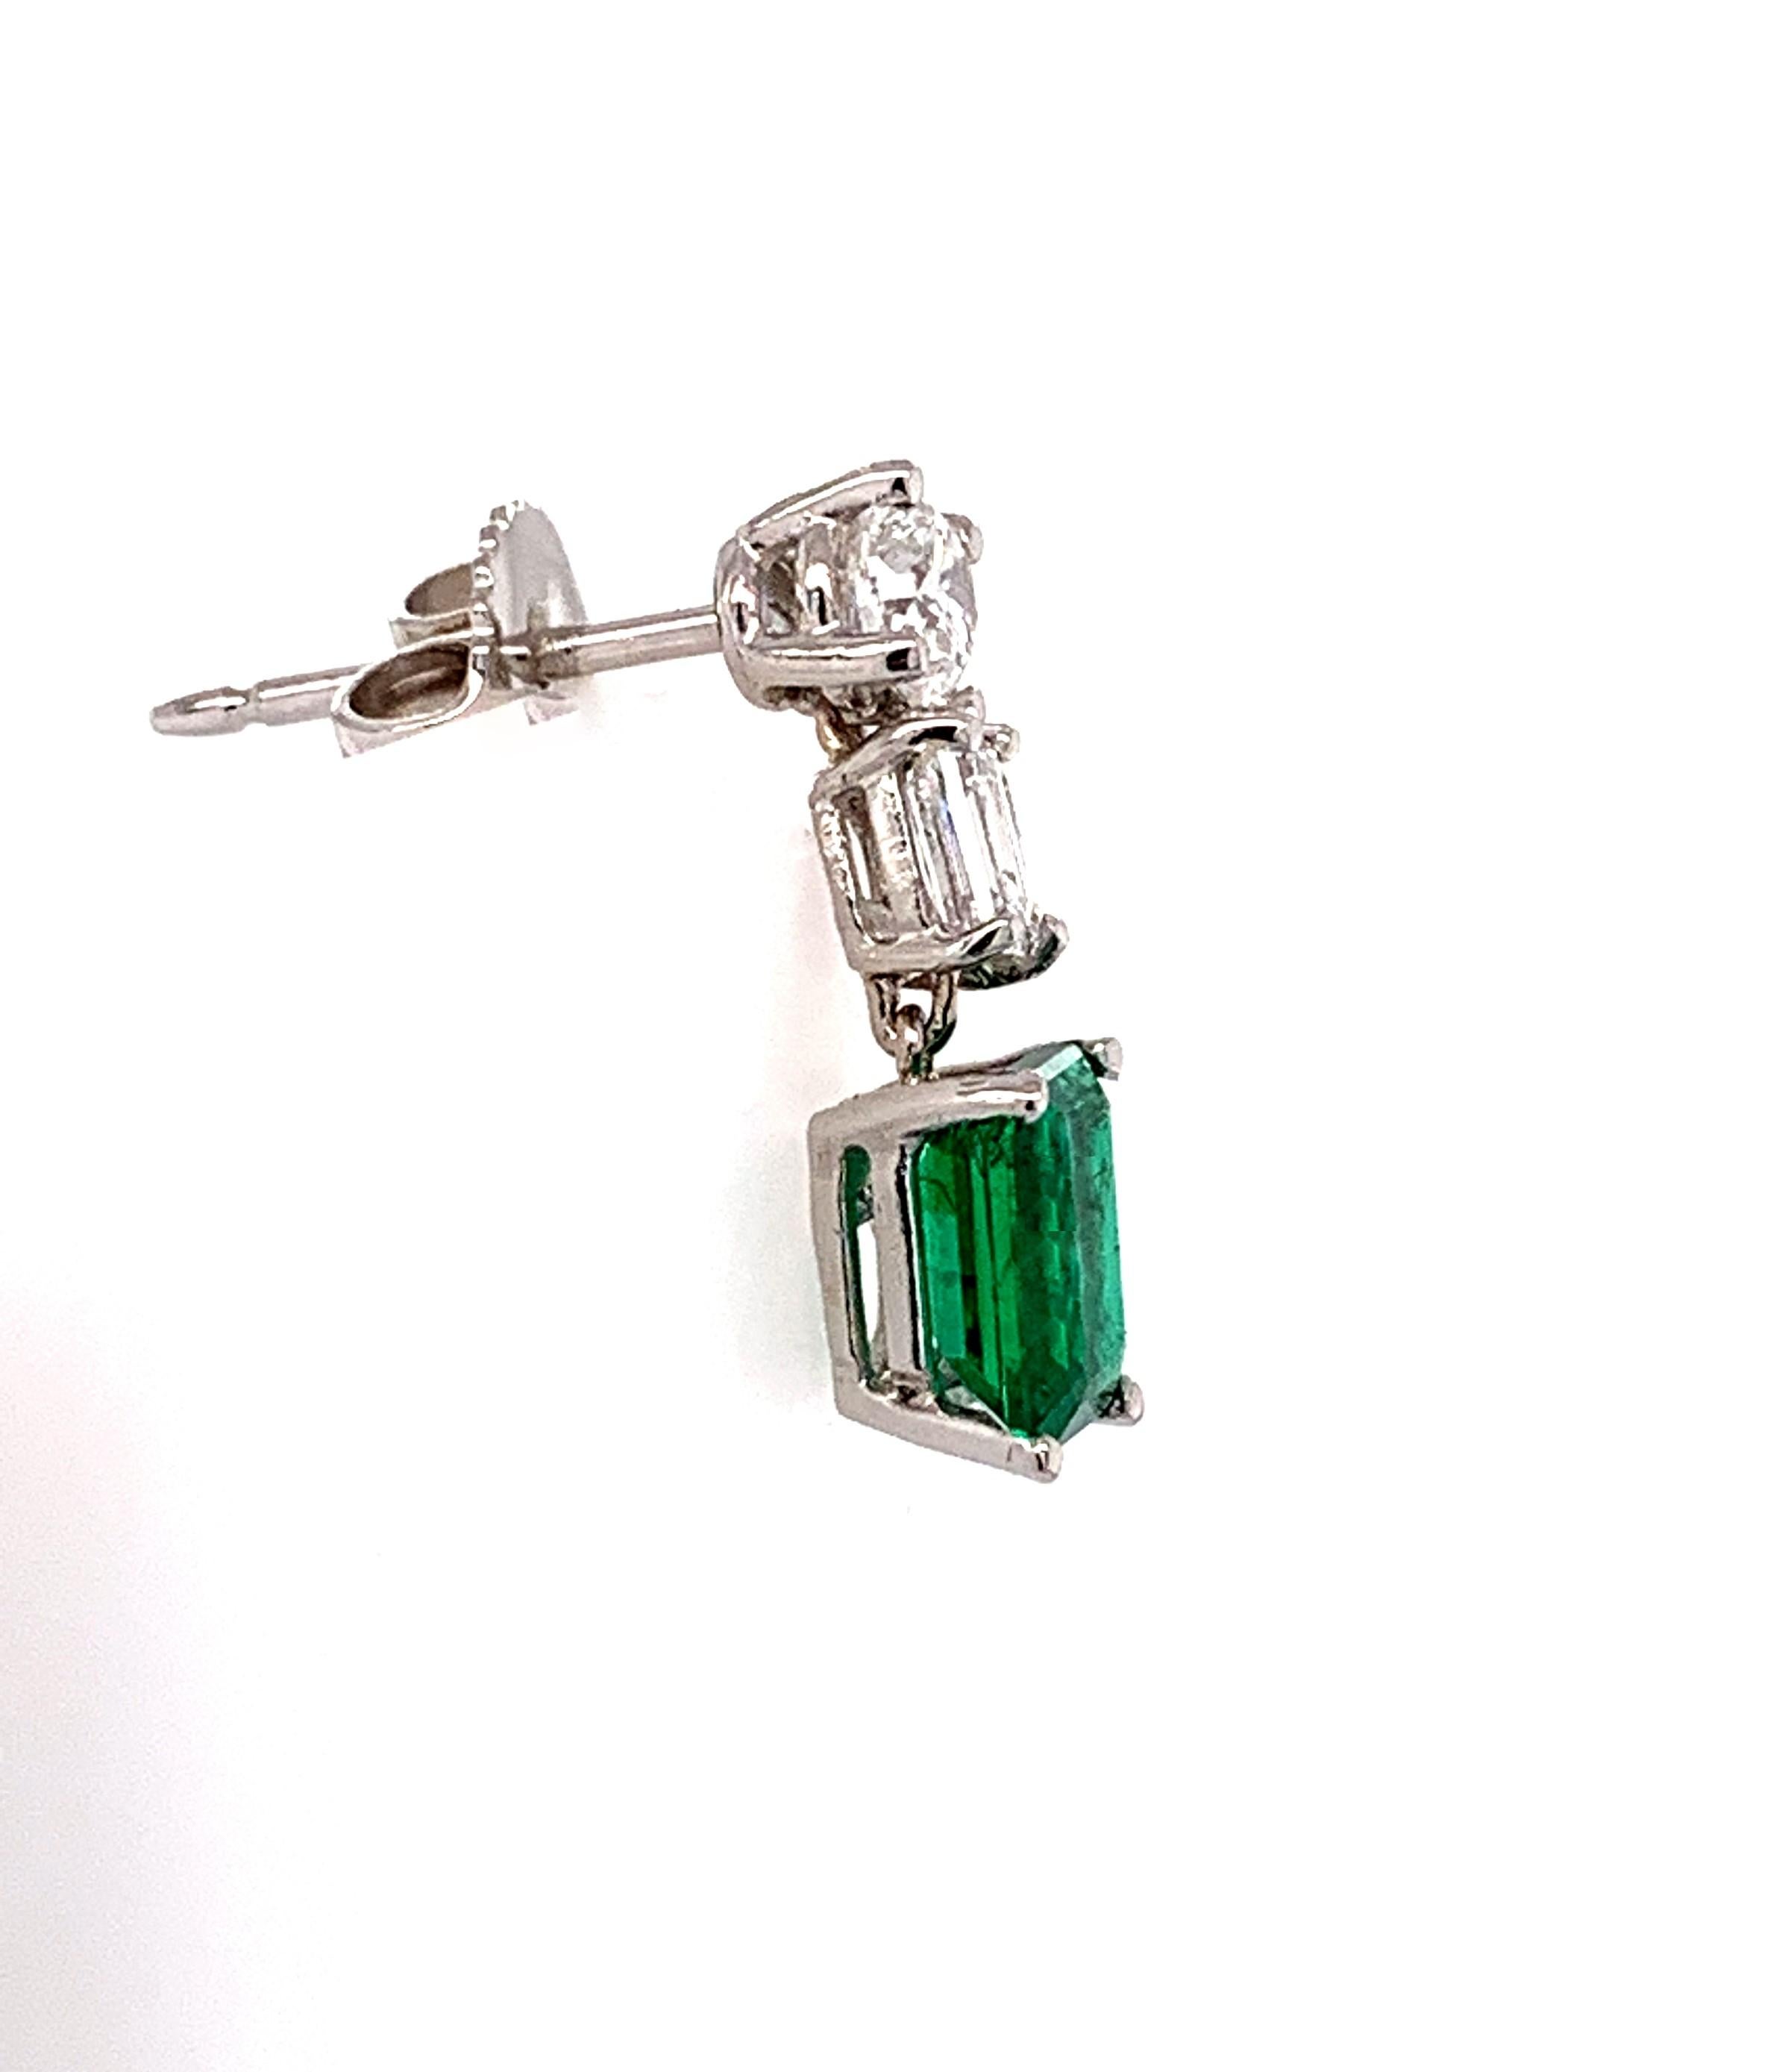 1.57 Carat 'Total Weight' Emerald and Diamond Earrings in Platinum In Excellent Condition For Sale In Delray Beach, FL